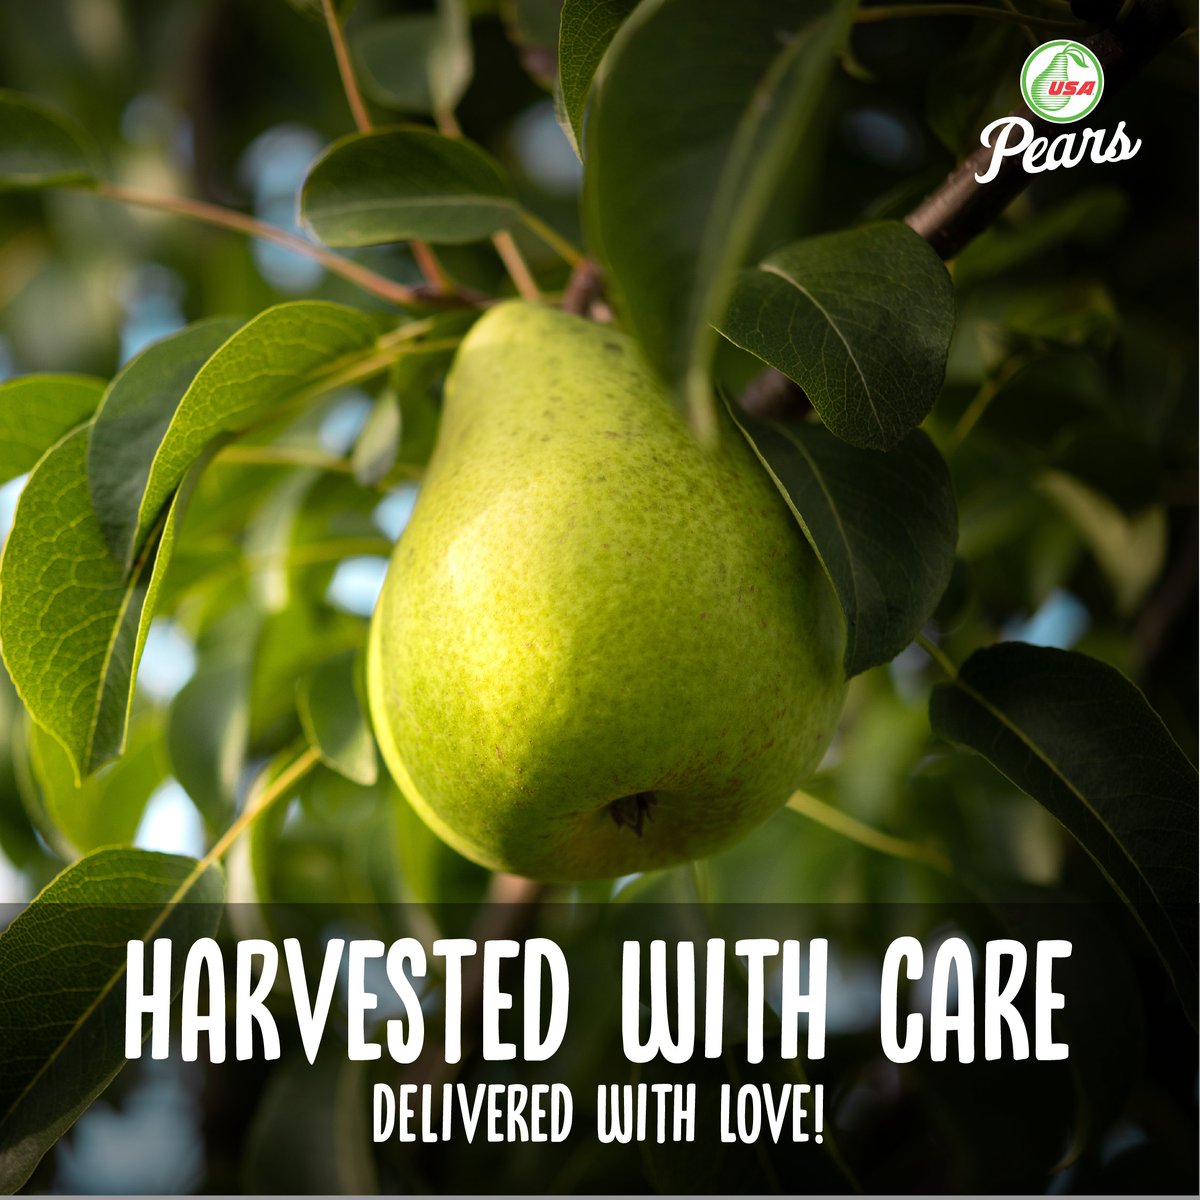 Taste the perfect blend of sweetness and freshness, straight from American orchards to your table.

usapears.org/tree-to-table/

#USAPears #USAPearIndia #Pears #Fruit #Nutrition #BestQuality #FarmToTable